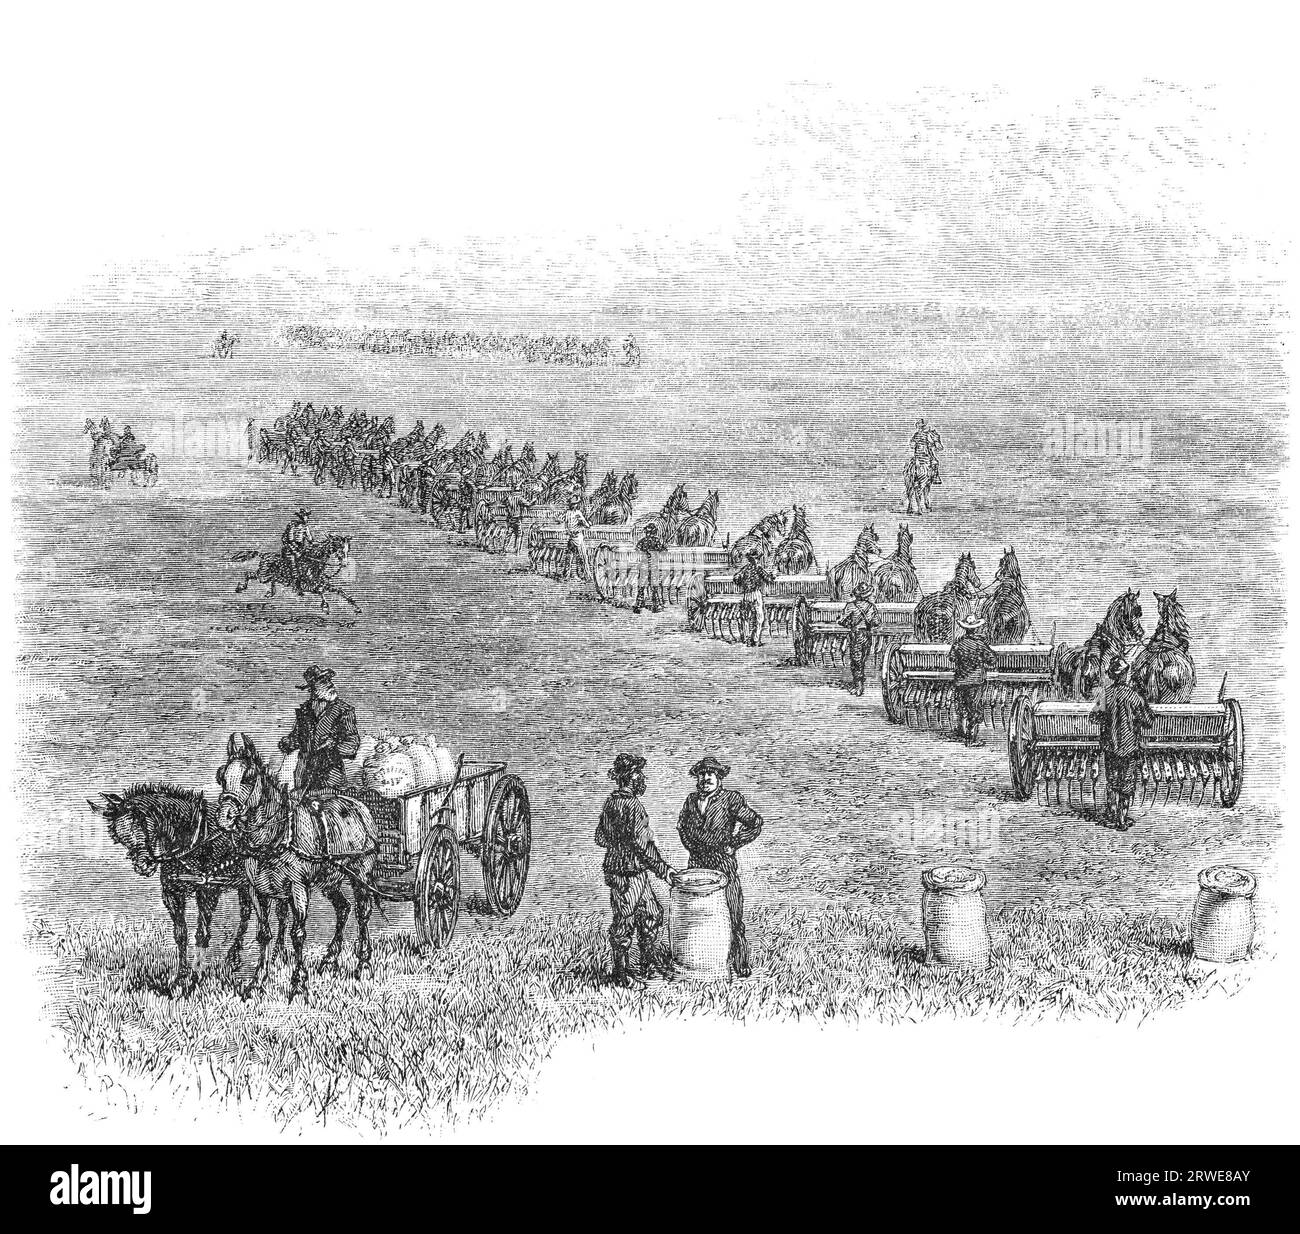 Agriculture in Dakota, USA: Sowing the wheat. Image source: Harpers Monthly magazine march 1880 Stock Photo